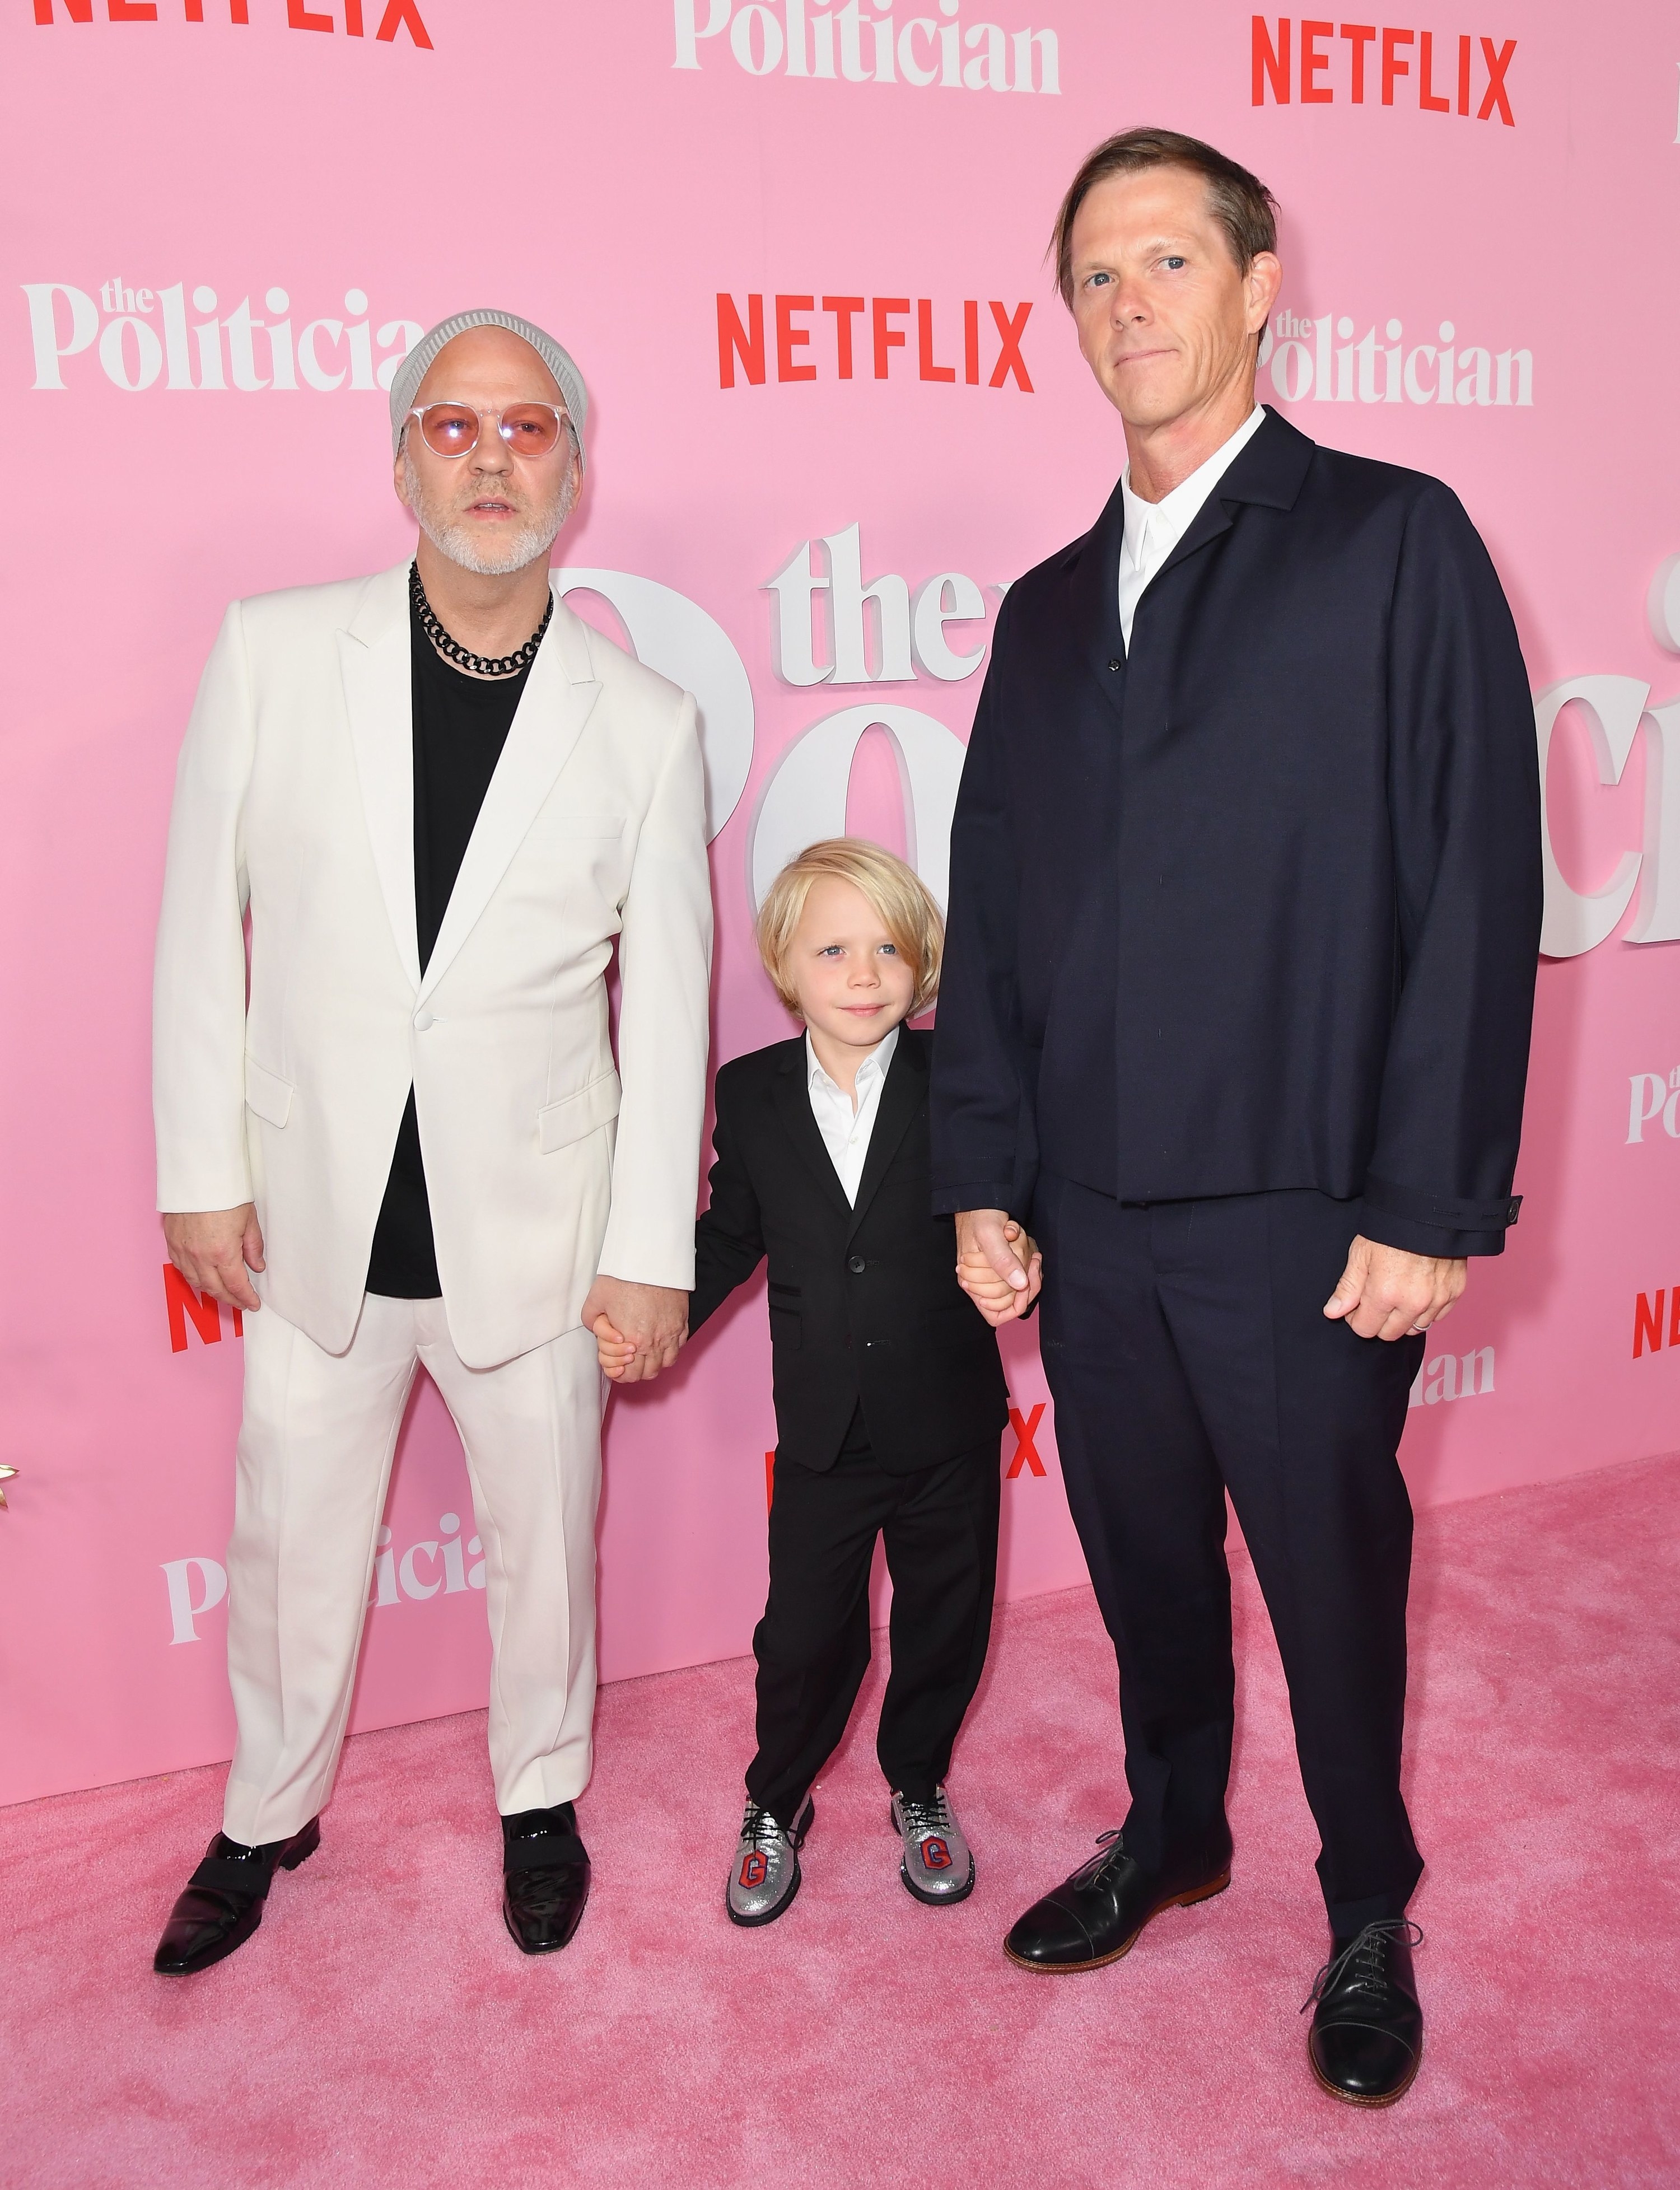 on the pink carpet for the politician movie